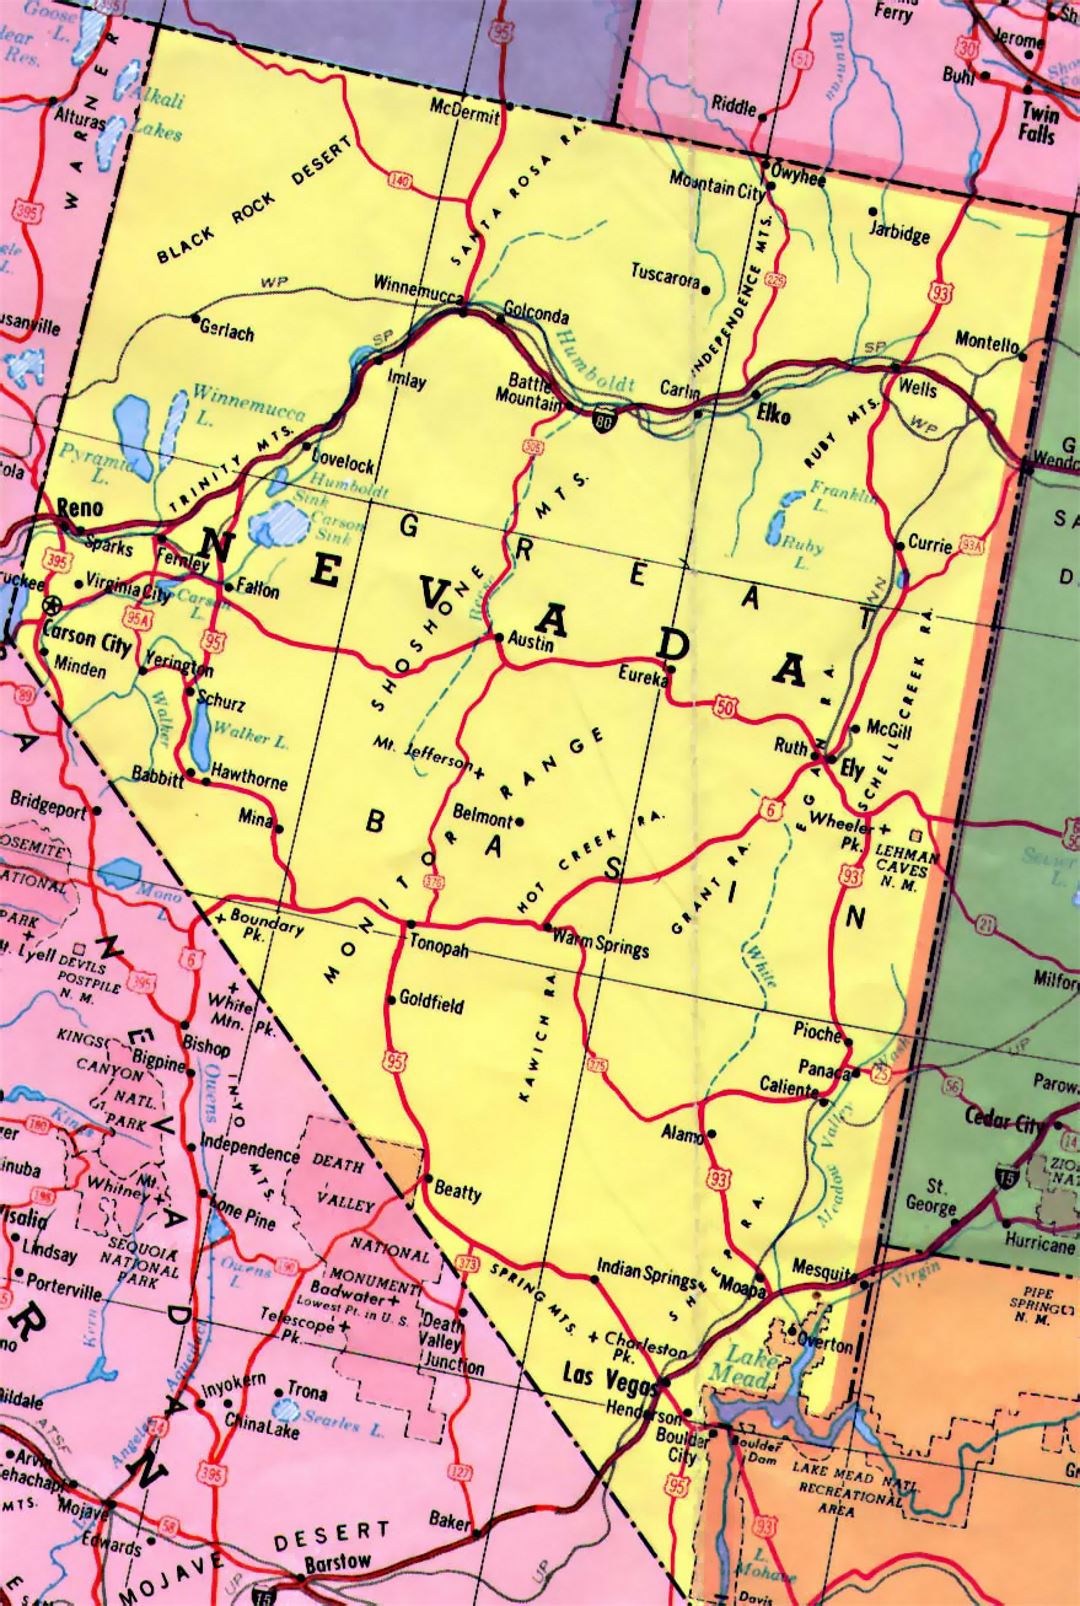 Highways map of Nevada state